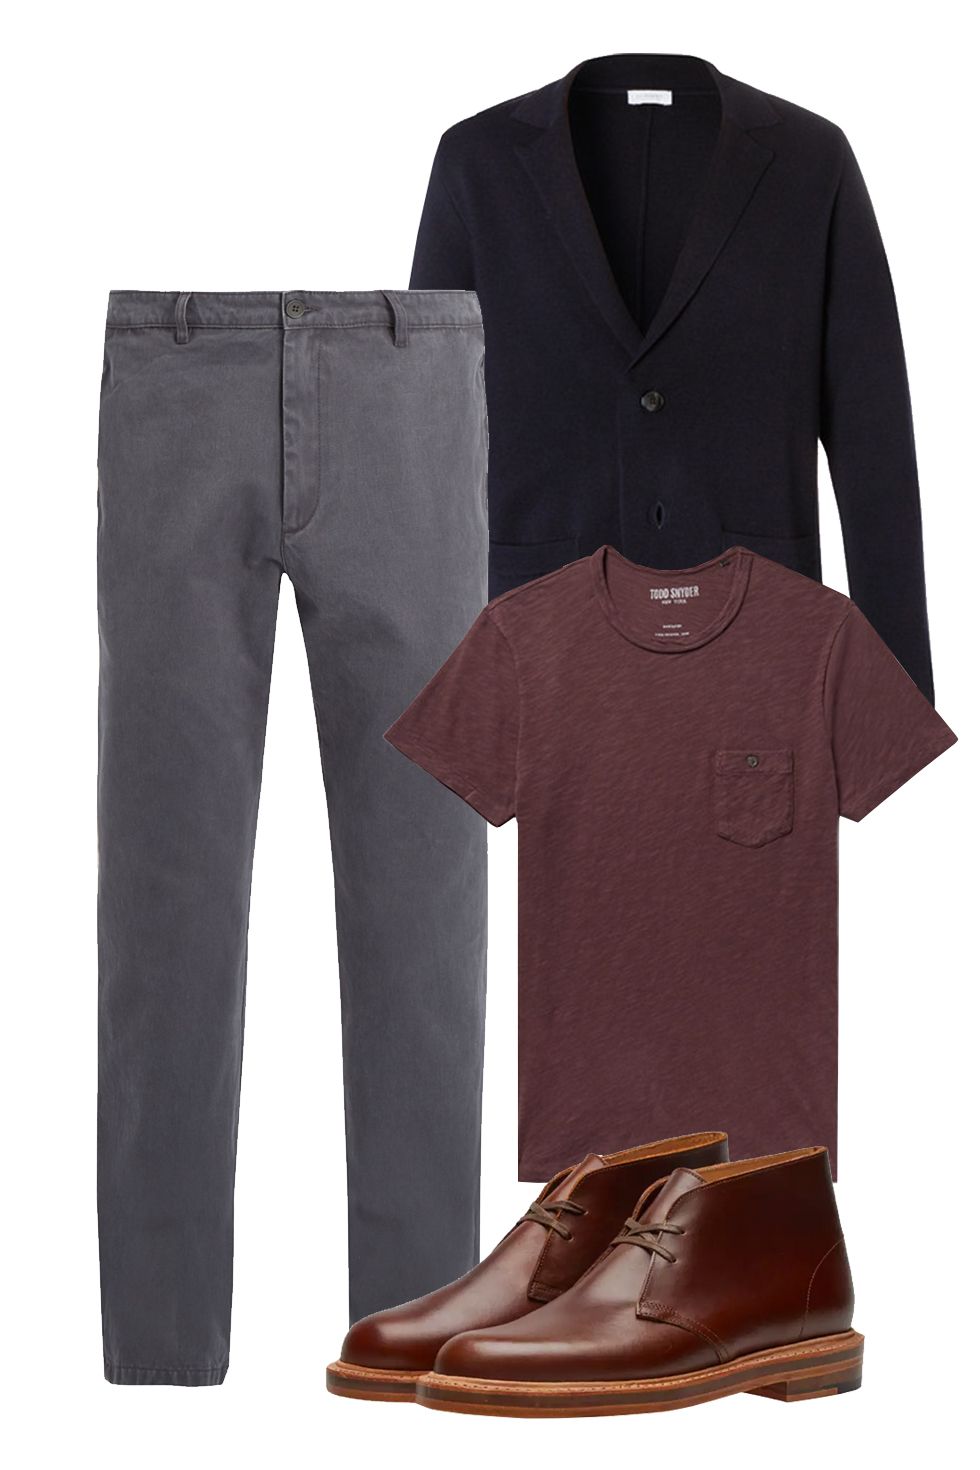 5 Stylish Club Outfit Ideas for Men - What a Man Should Wear to the Club